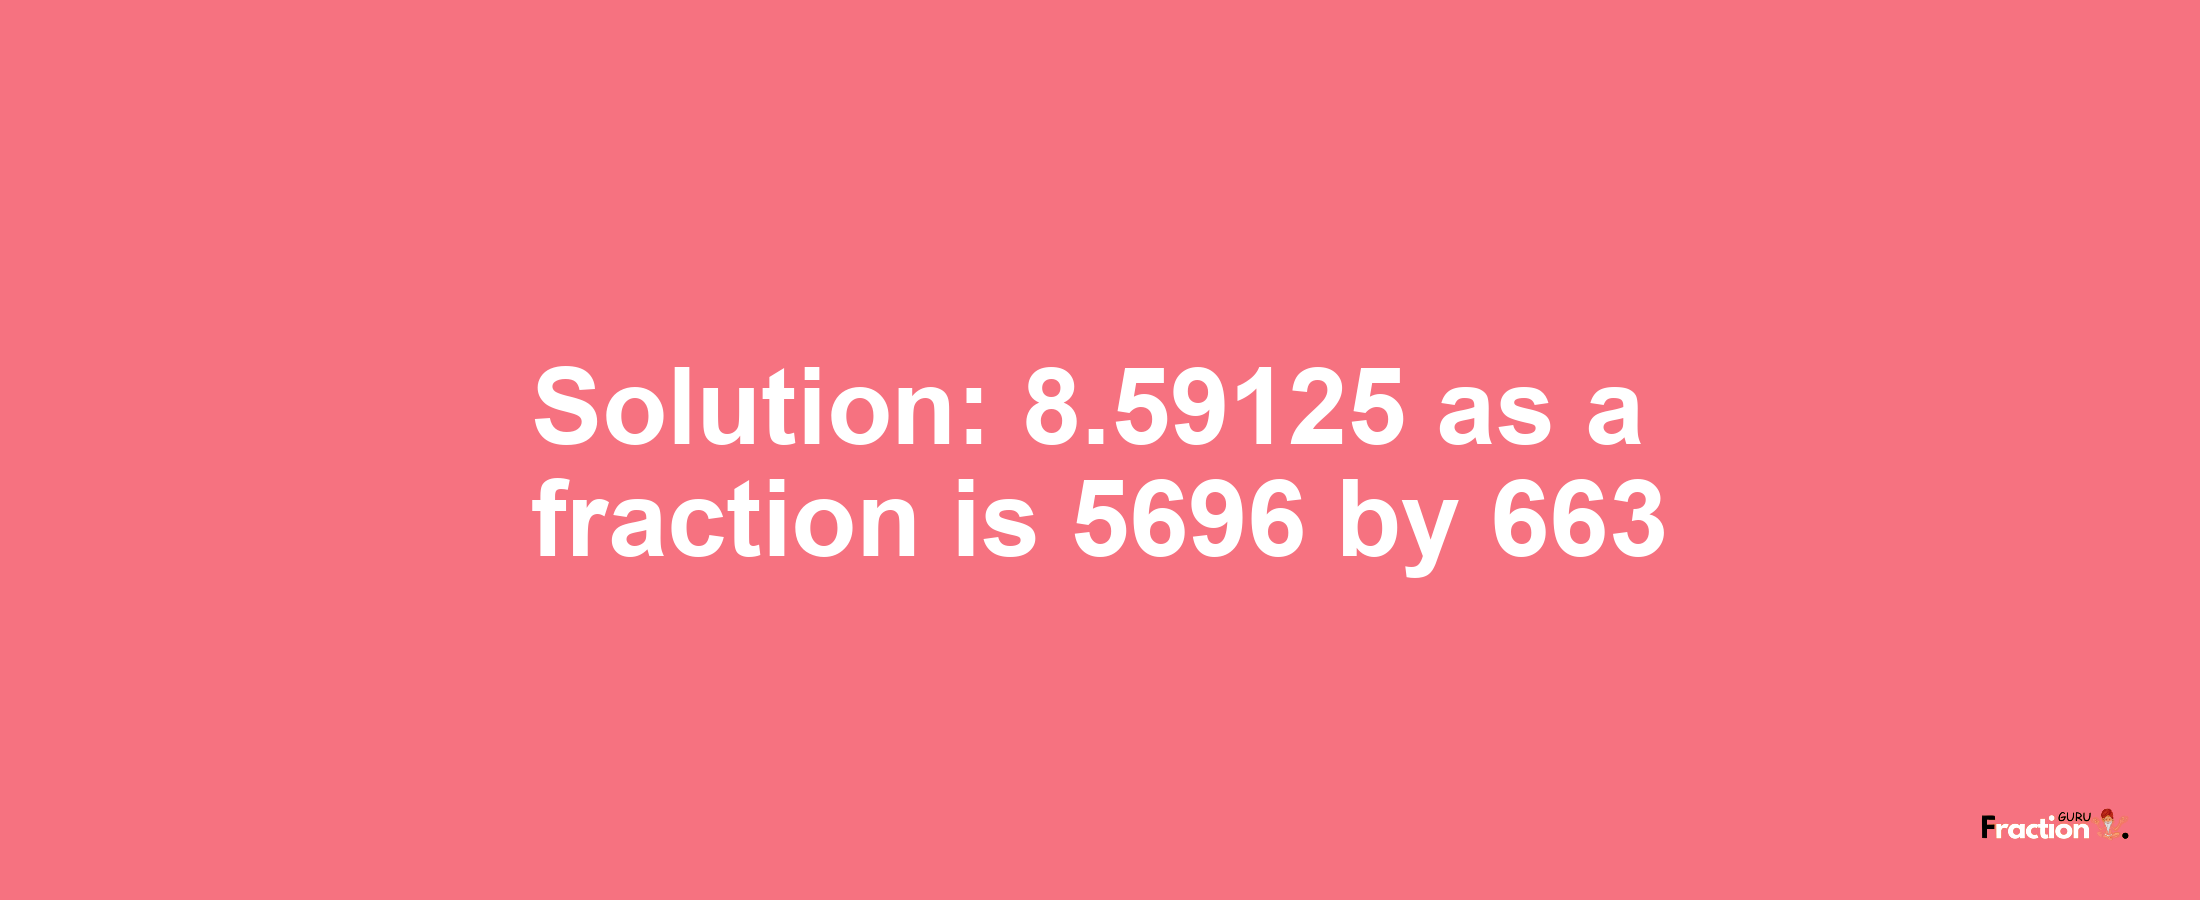 Solution:8.59125 as a fraction is 5696/663